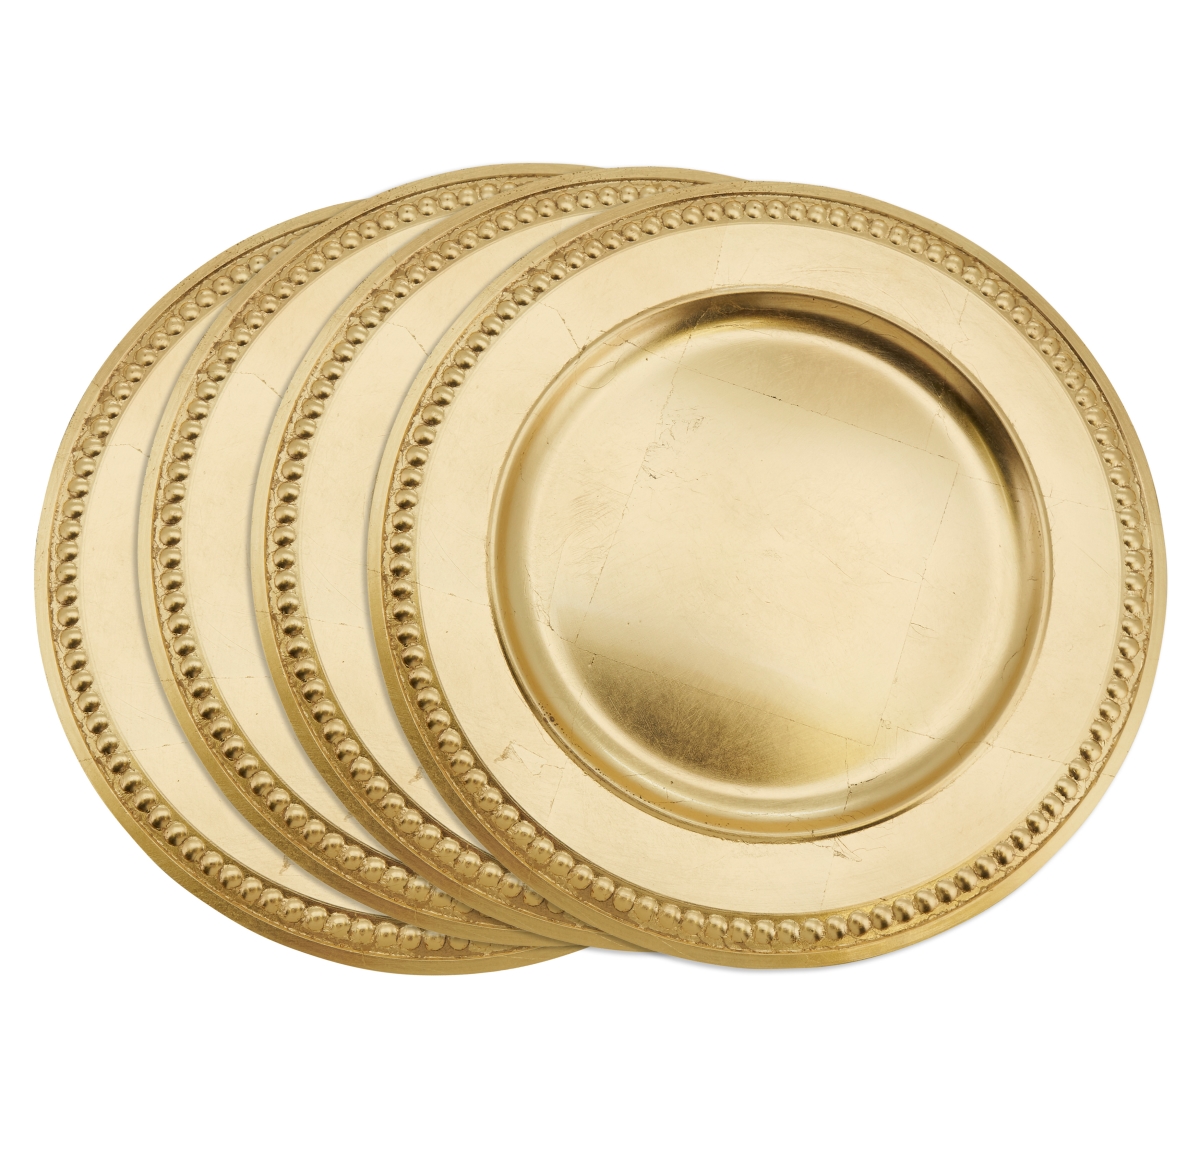 Ch286.gl14r 14 In. Round Embossed Bead Border Design Charger Plate - Gold, Set Of 4